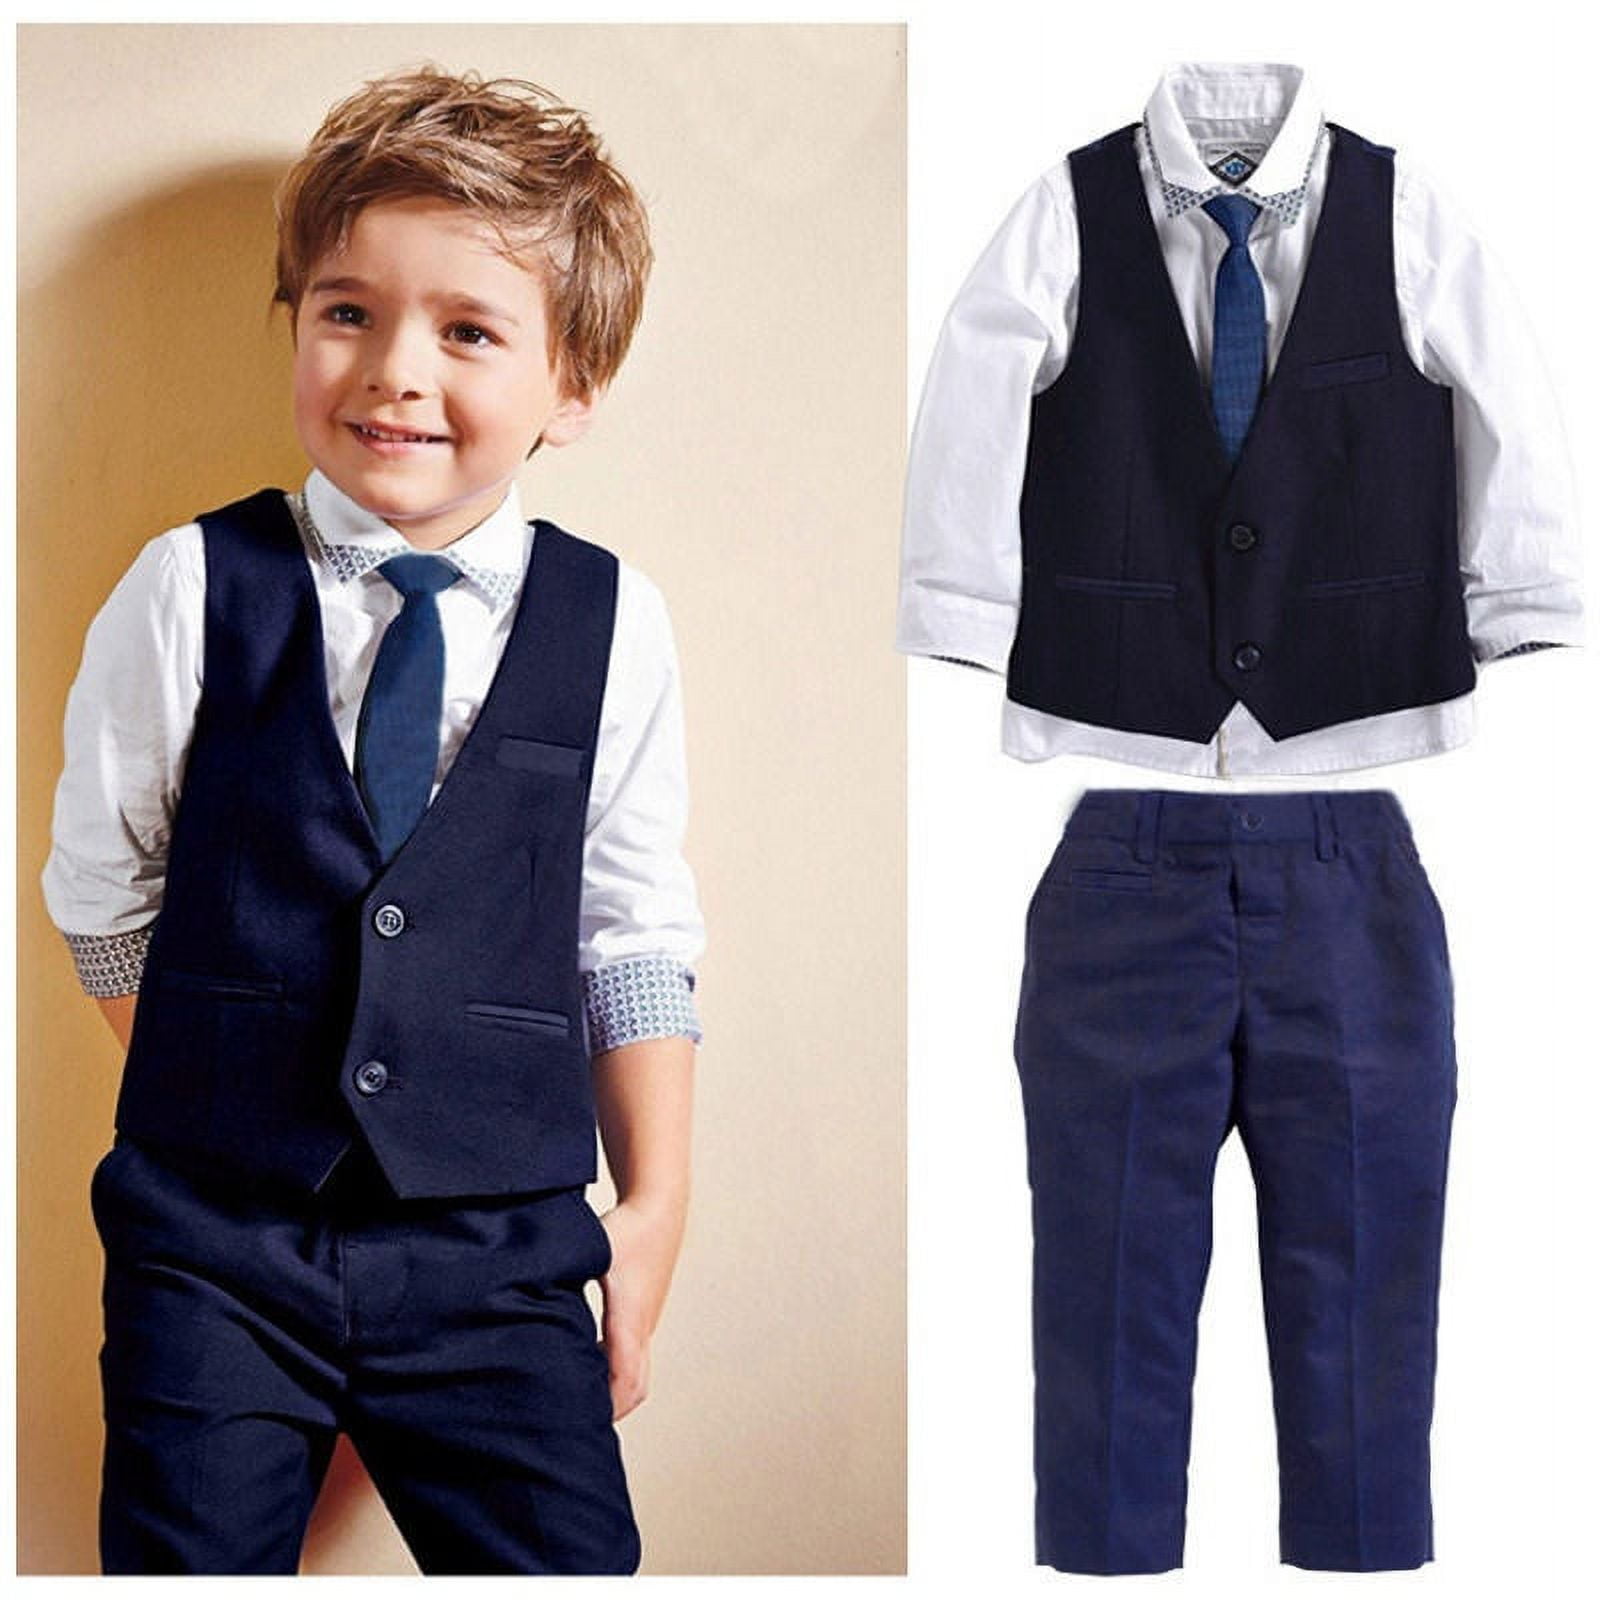 Formal Kids Dress Set With Waistcoat, Vest, Boys Uniform Pants, Bow Tie  Perfect For Birthday Parties And Flower Boy Or Child Tuxedo Style 230626  From Bian08, $16.51 | DHgate.Com